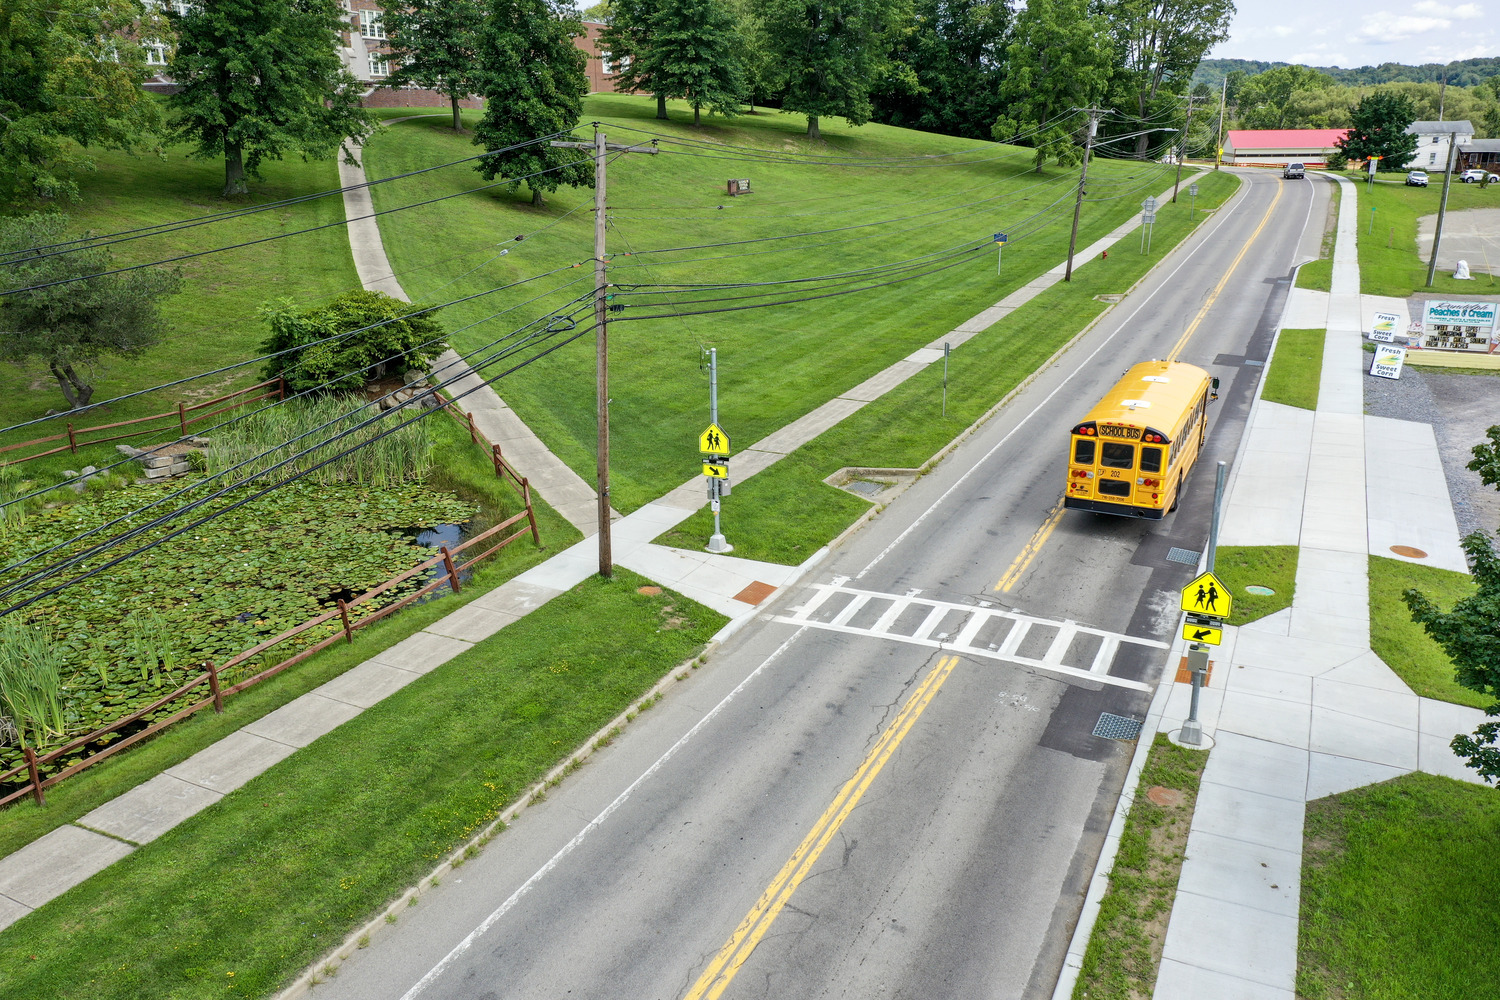 Town of Randolph Pedestrian Safety exterior image of street with a crosswalk and a school bus